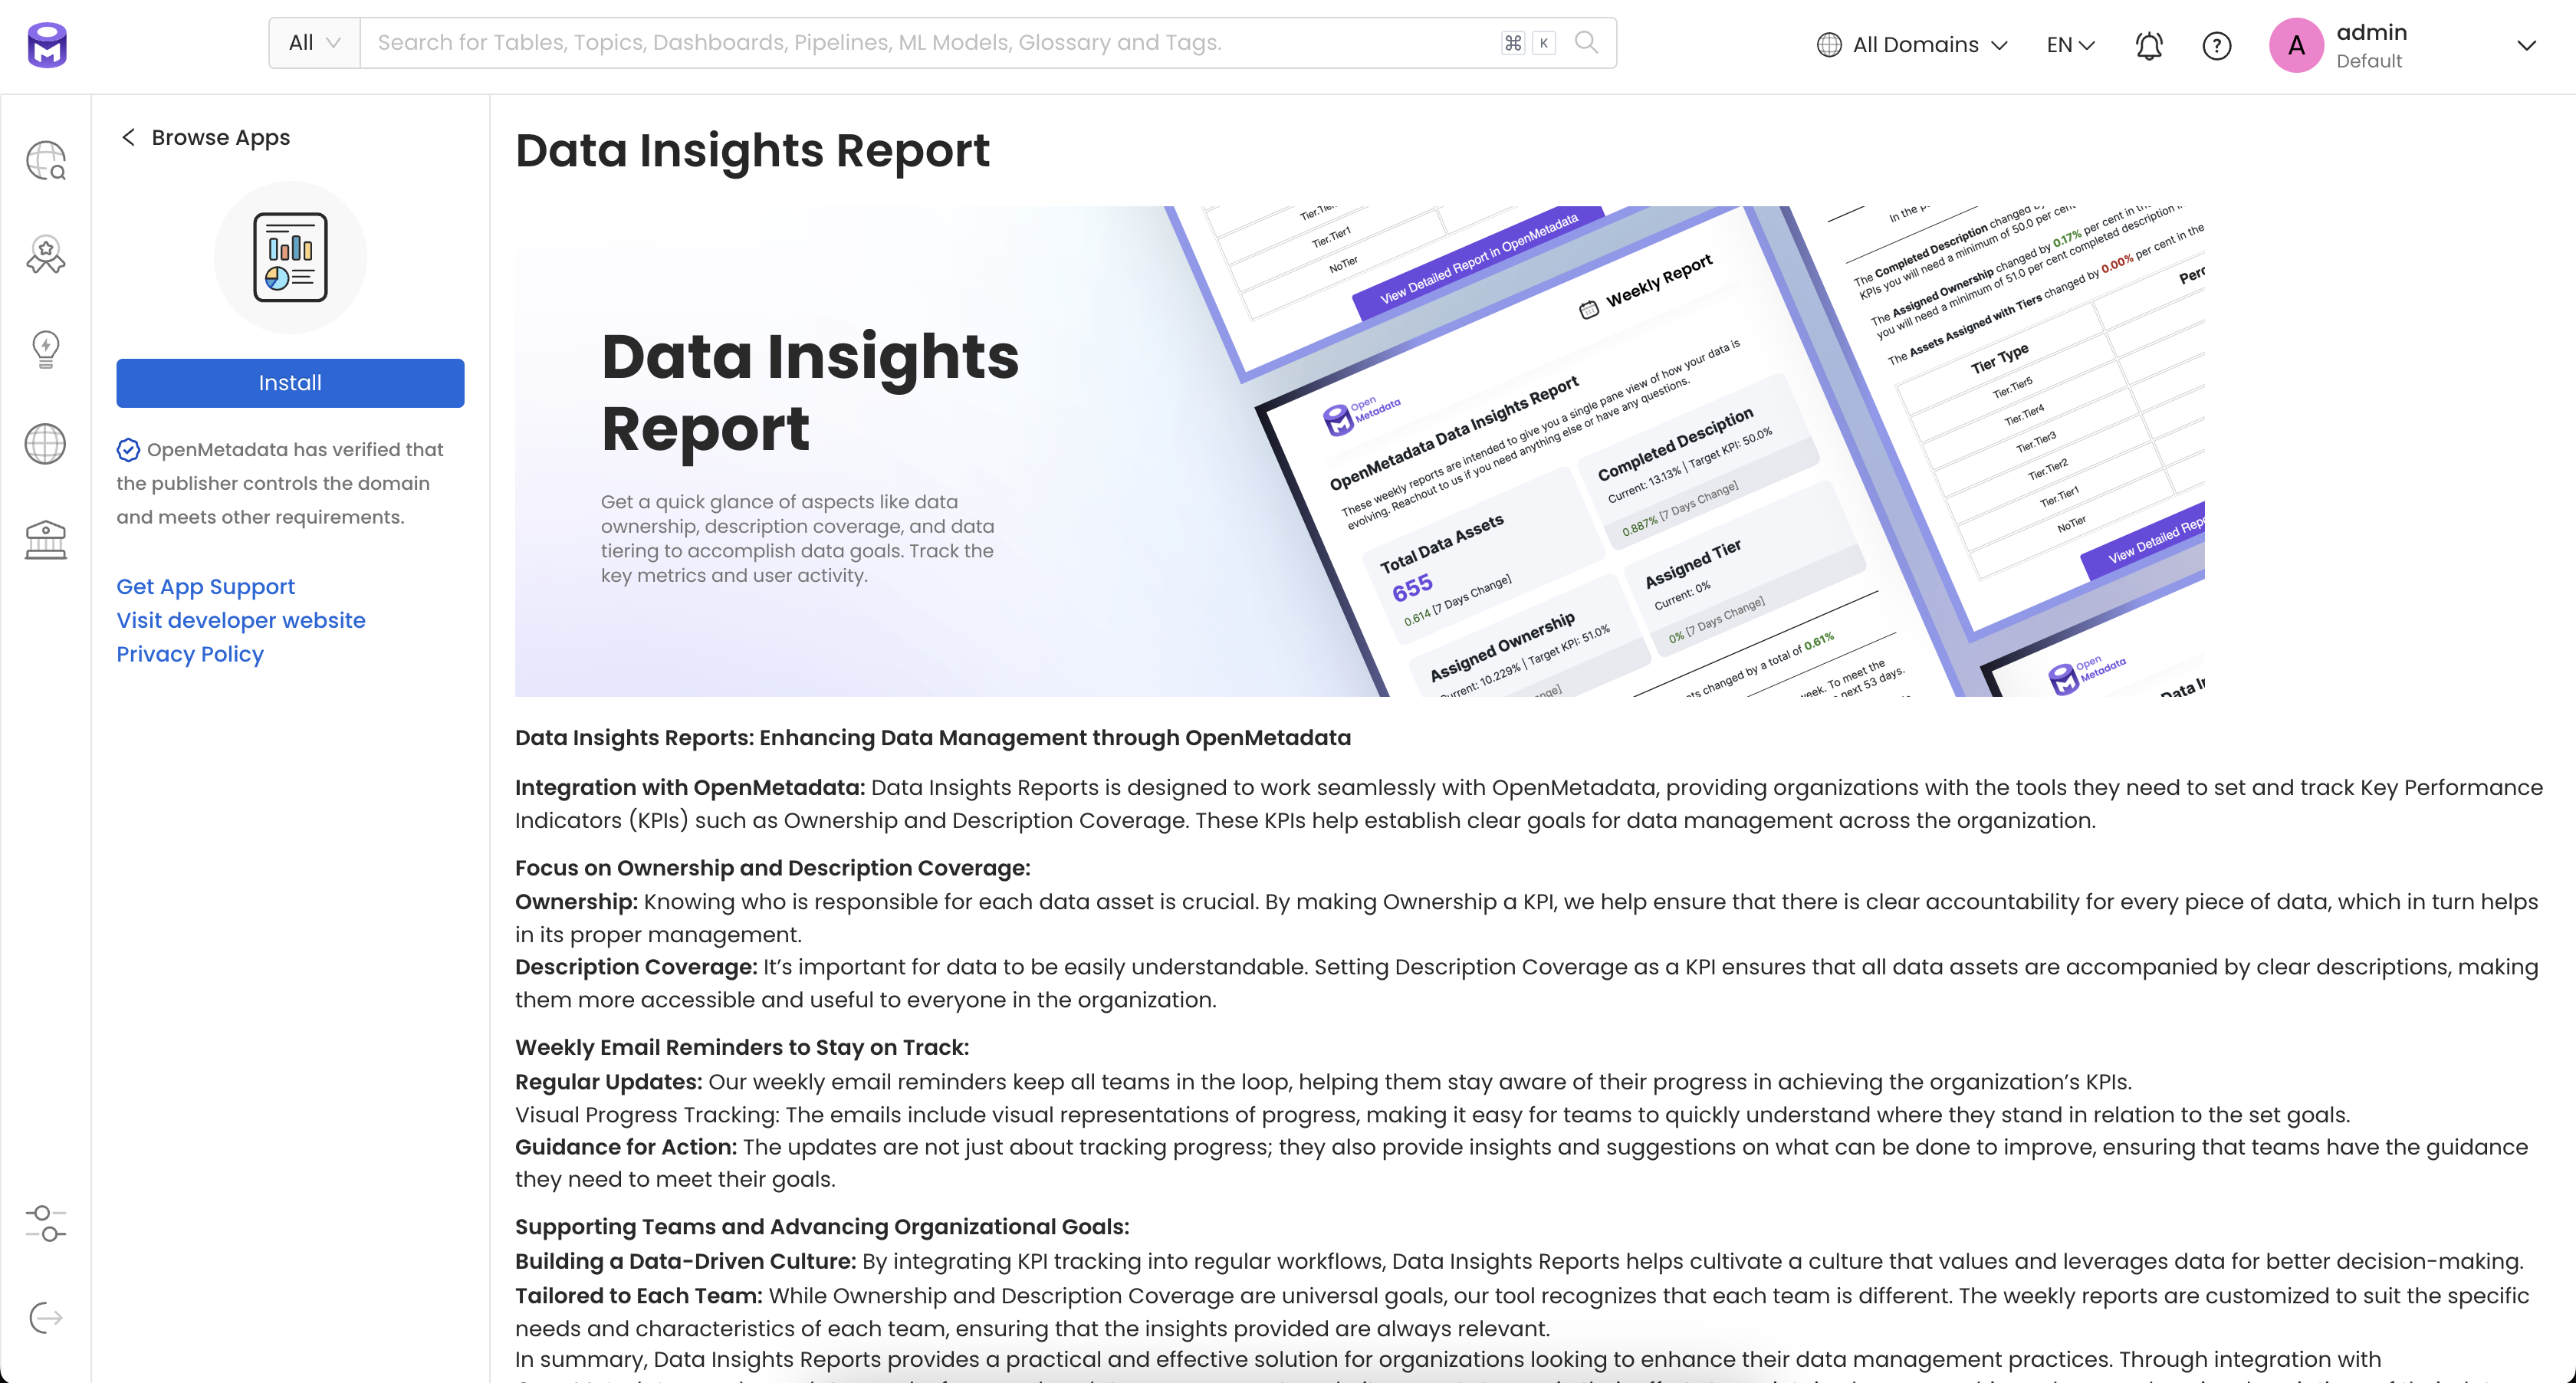 Install the Data Insights Report